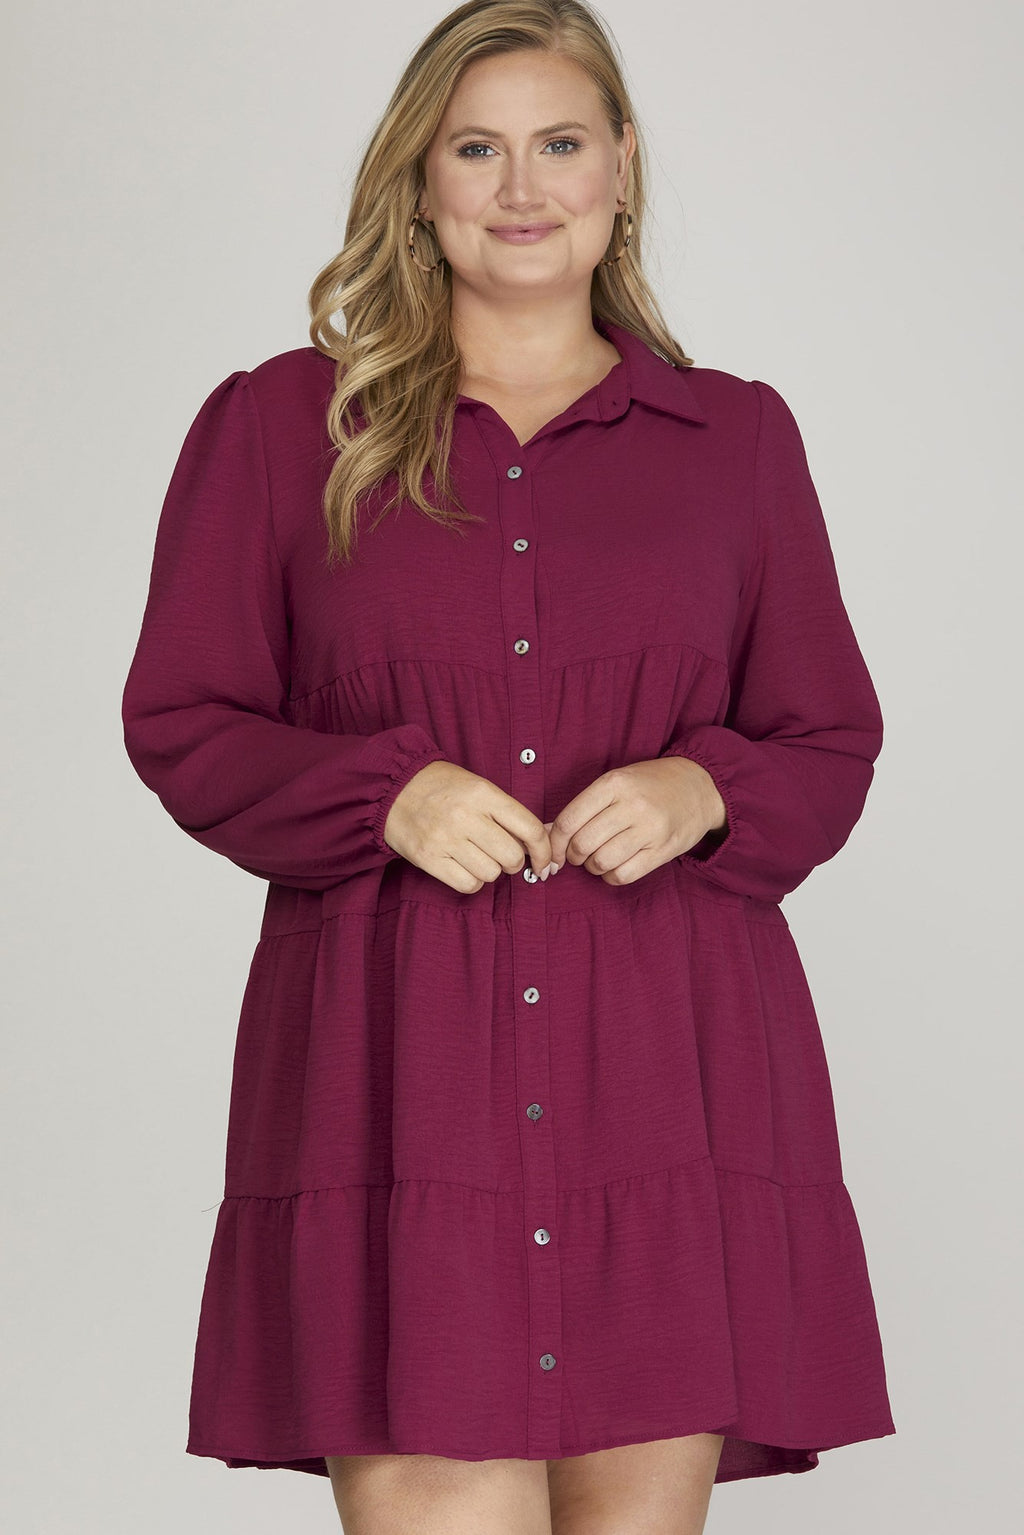 LONG SLEEVE WOVEN TIERED BUTTON DOWN DRESS